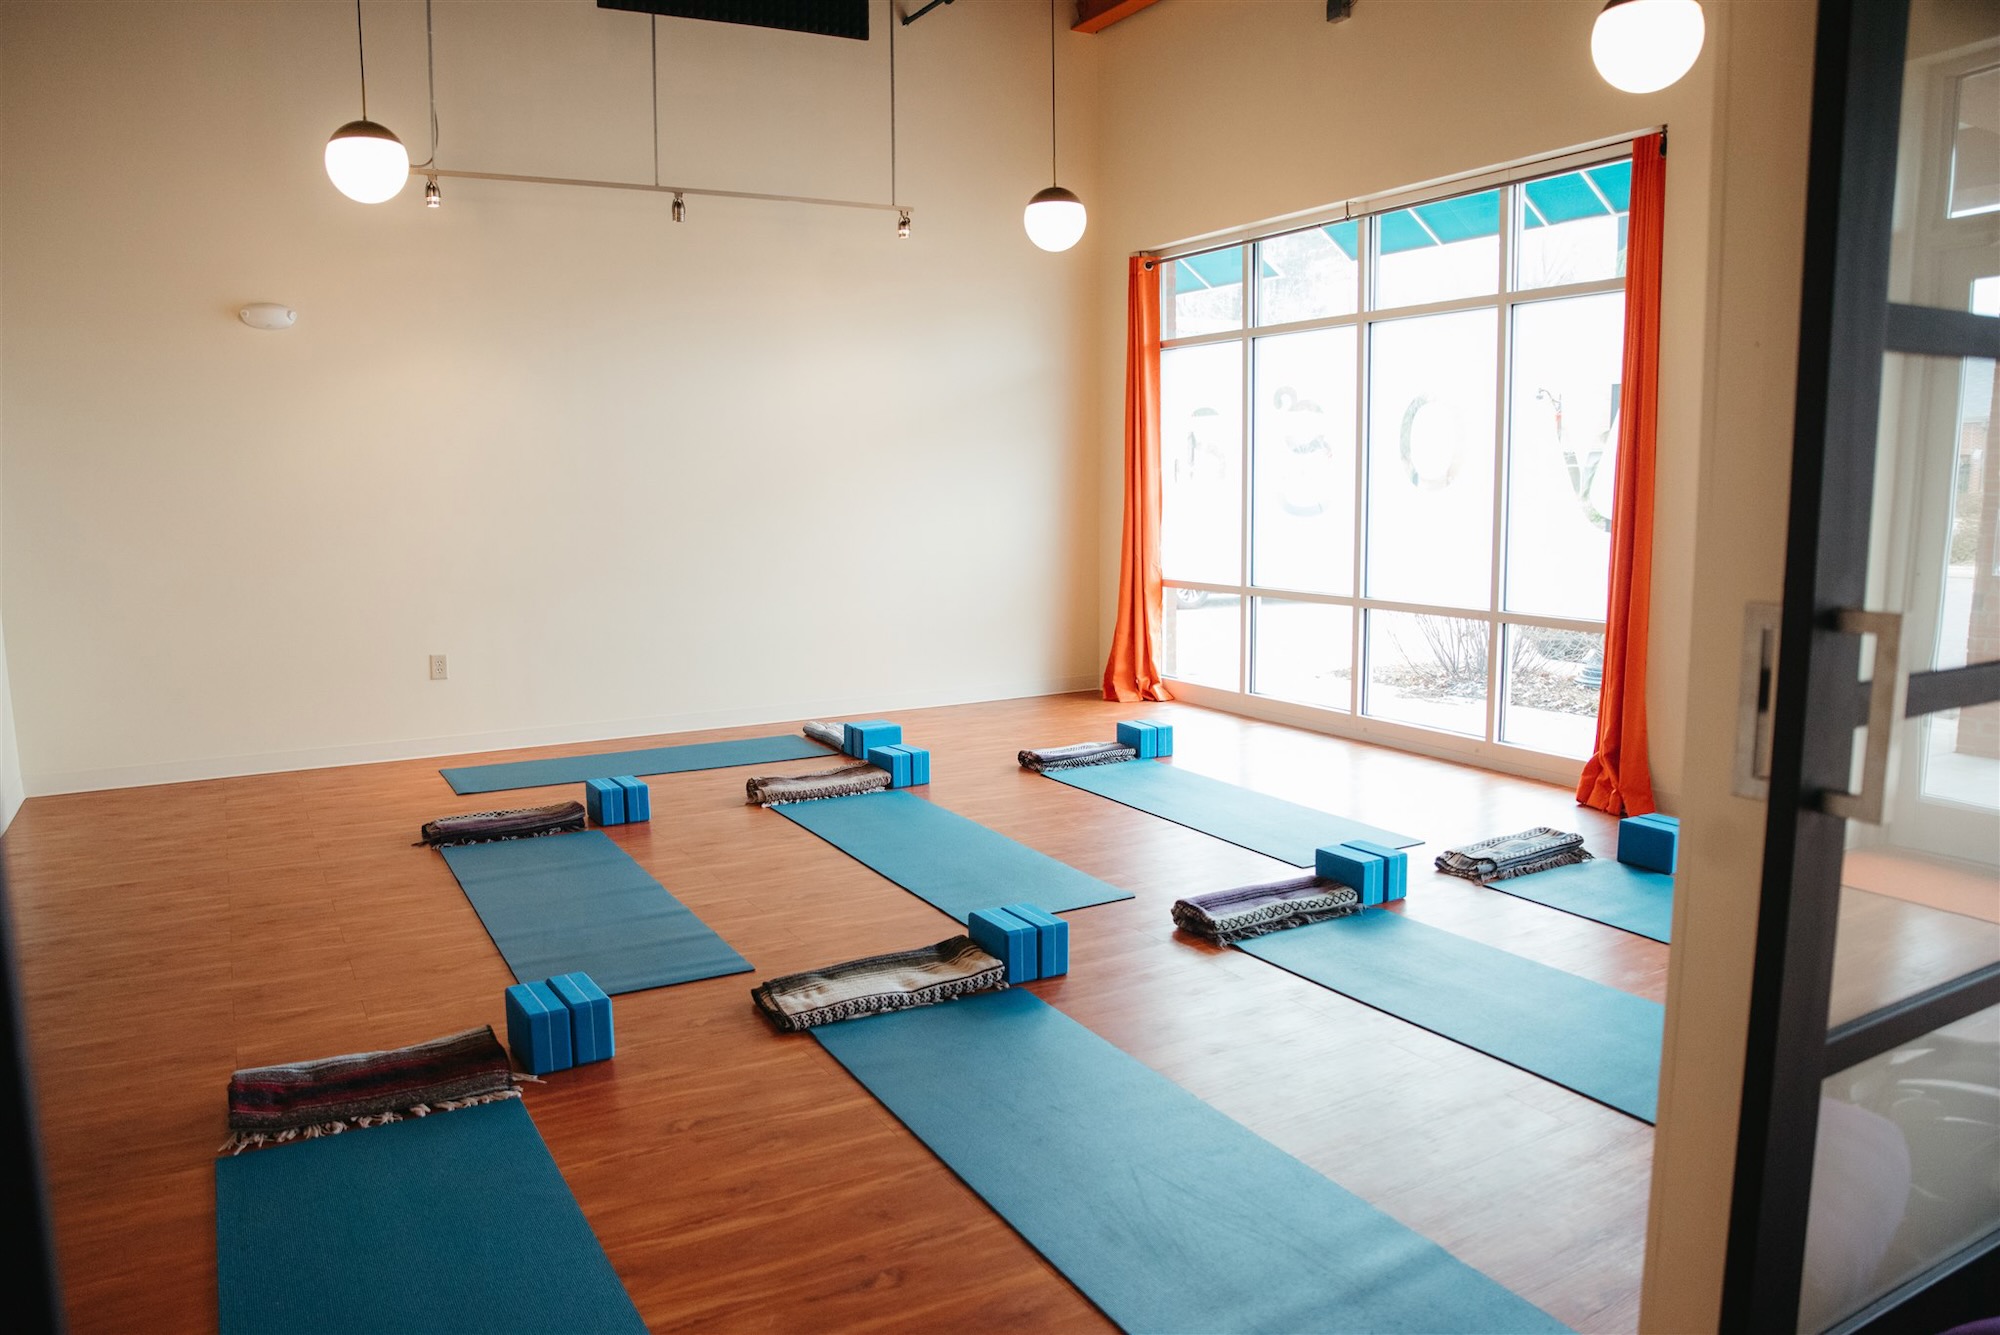 Front room at yoga studio with natural light shining through windows